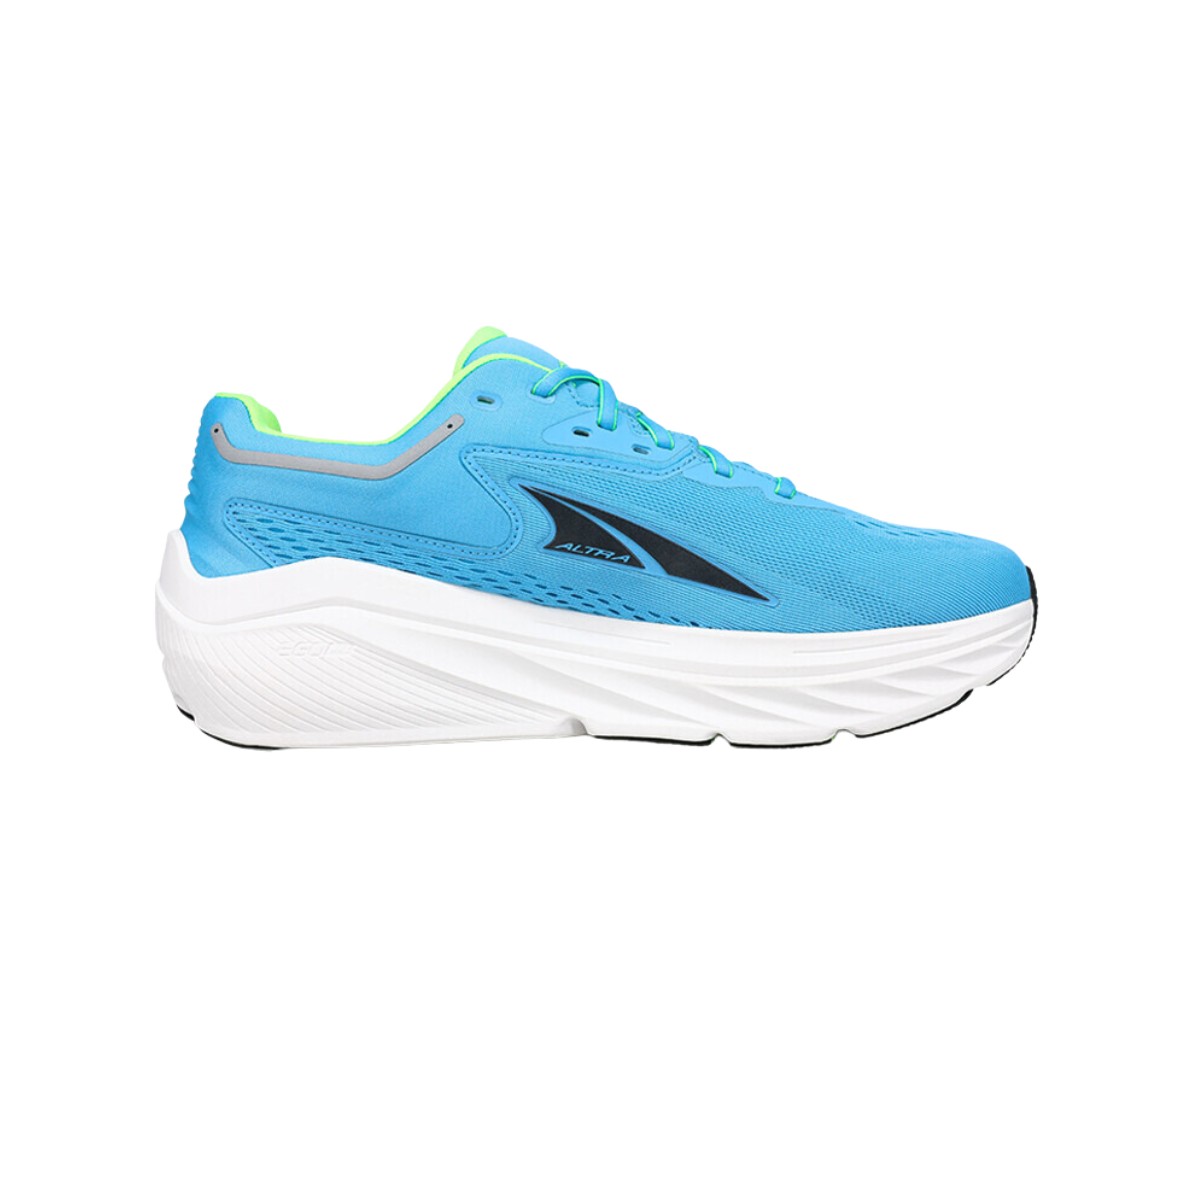 Altra Via Olympus Blue Green SS23 Shoes | Free shipping